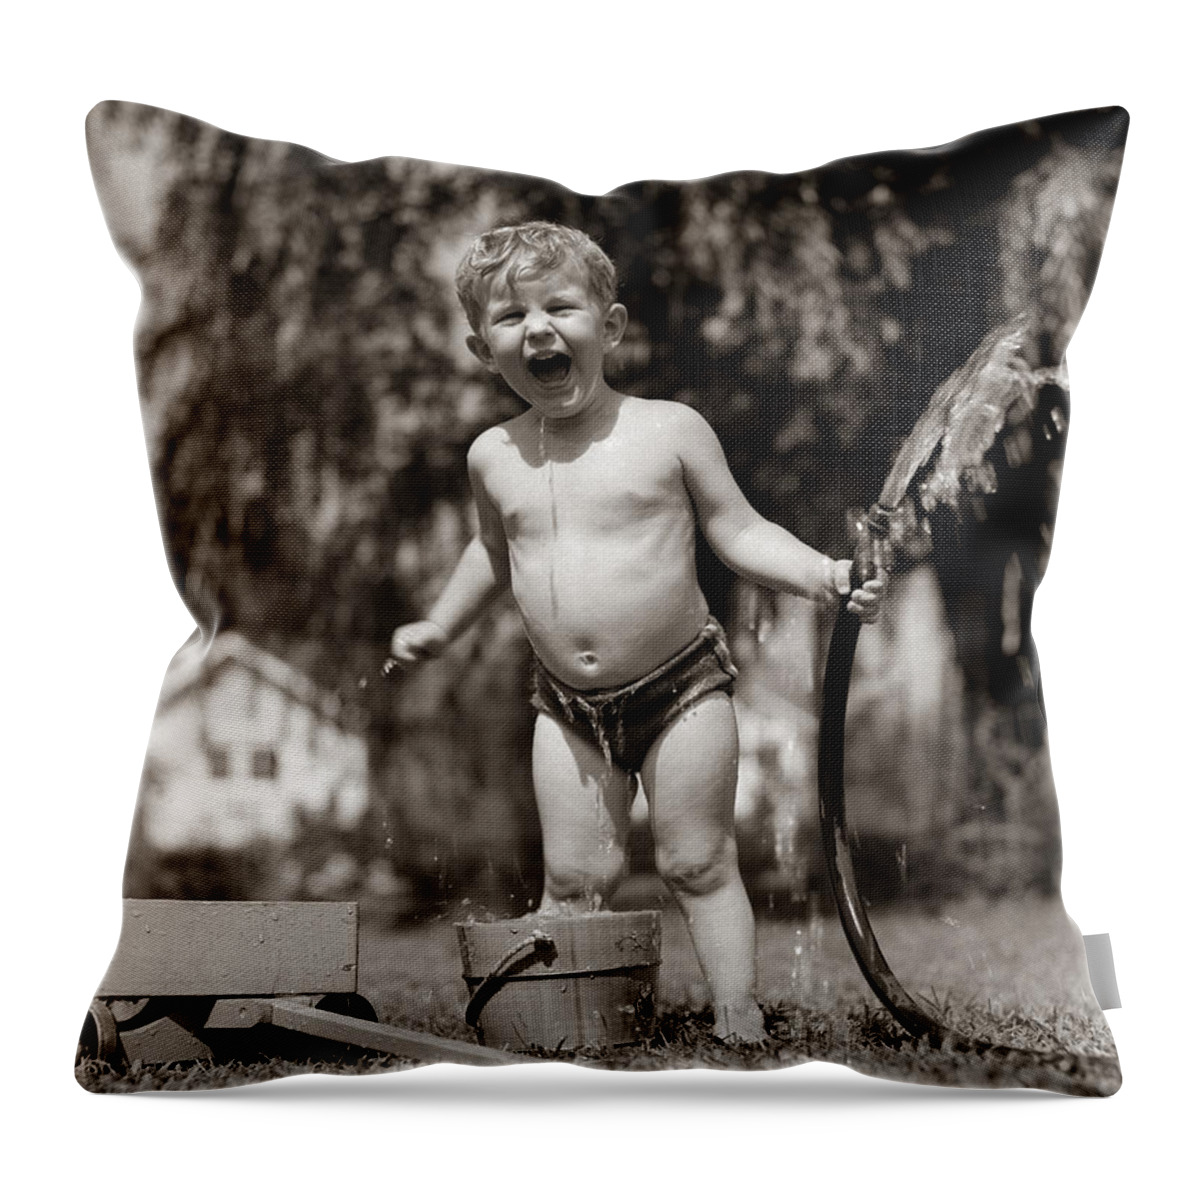 1940s Throw Pillow featuring the photograph Little Boy Playing With Hose, C.1940-50s by H. Armstrong Roberts/ClassicStock